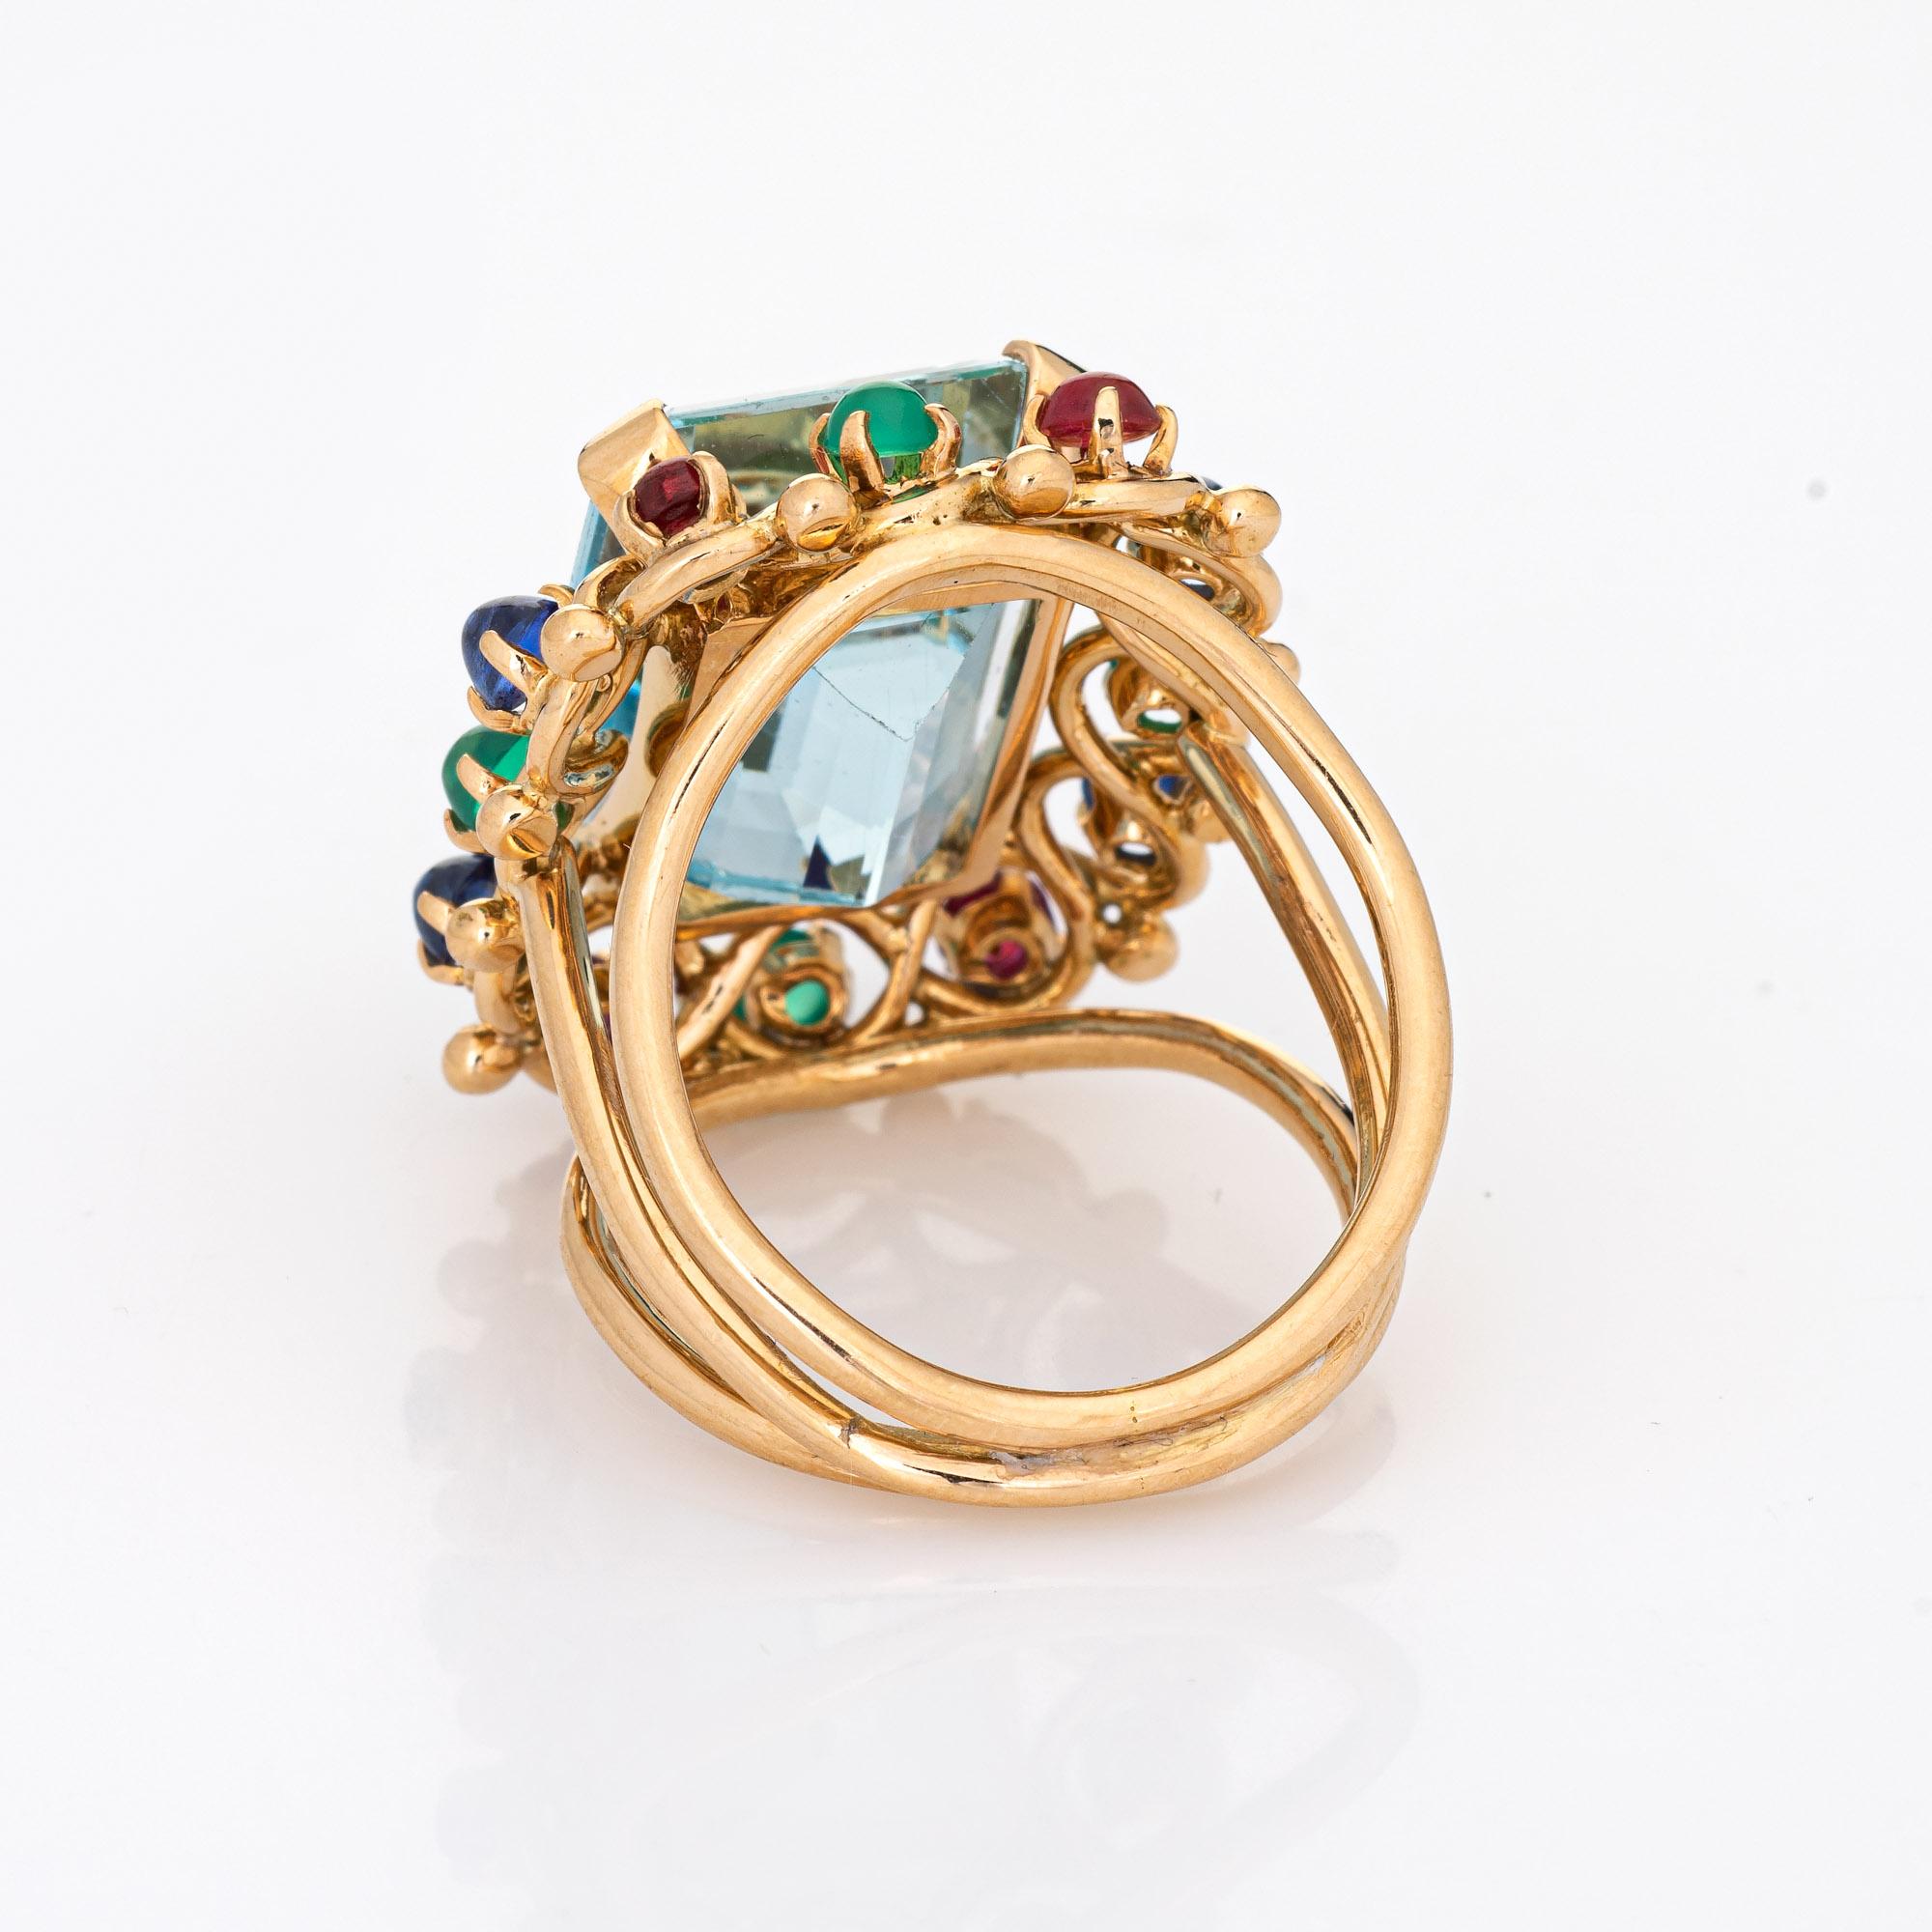 16.50ct Aquamarine Gemstone Ring Vintage 14k Yellow Gold Cocktail Jewelry In Good Condition For Sale In Torrance, CA